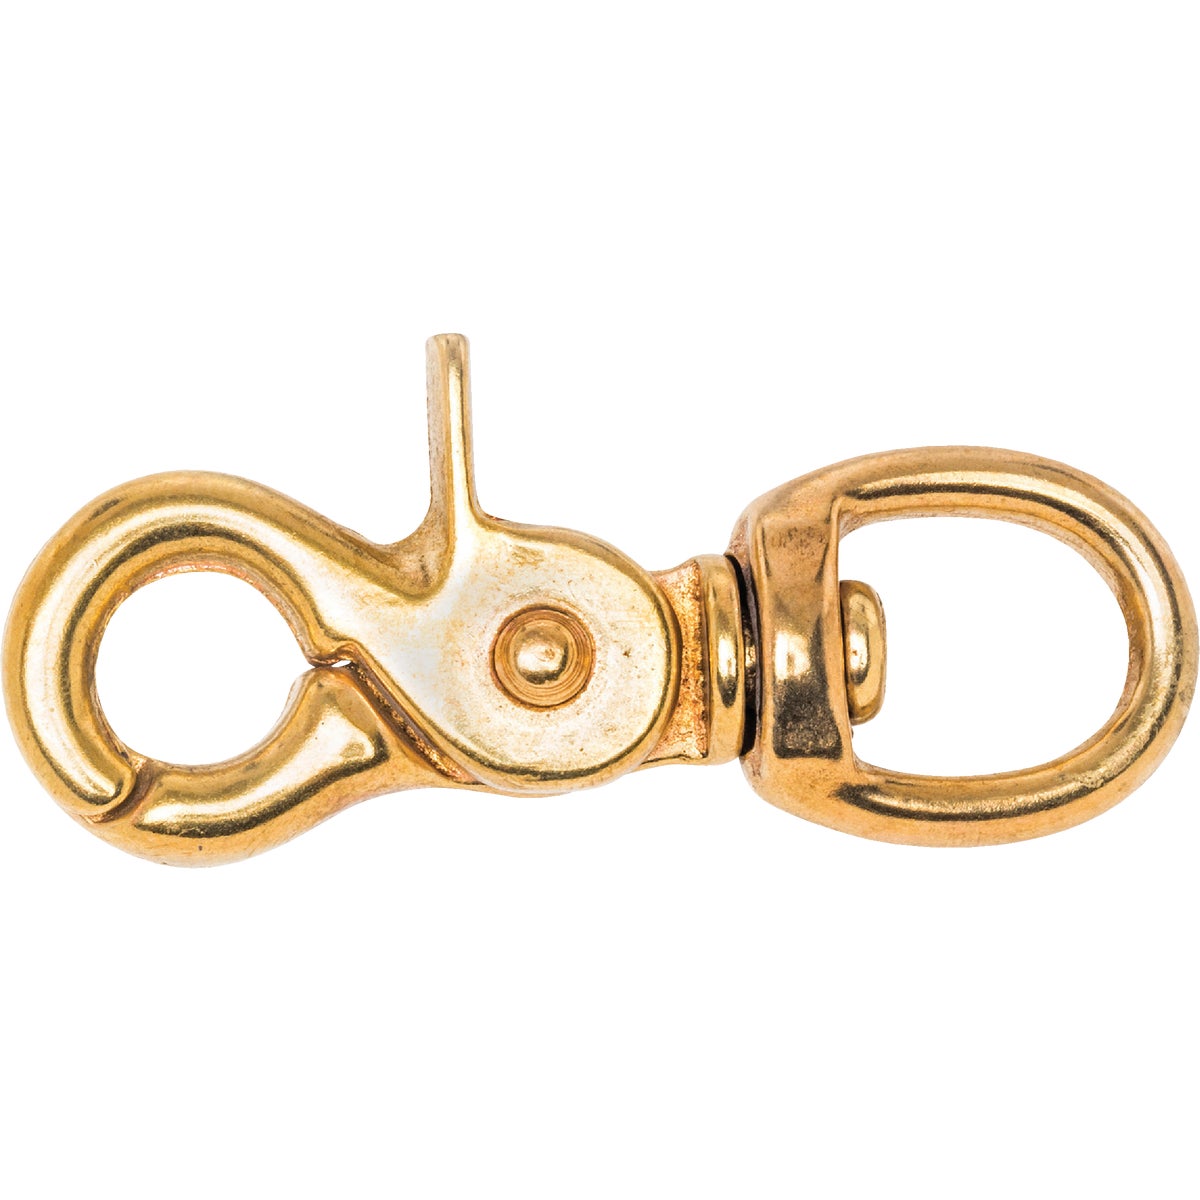 Item 746214, Solid bronze construction swivel trigger snap. Eye size: 1/2-inch.